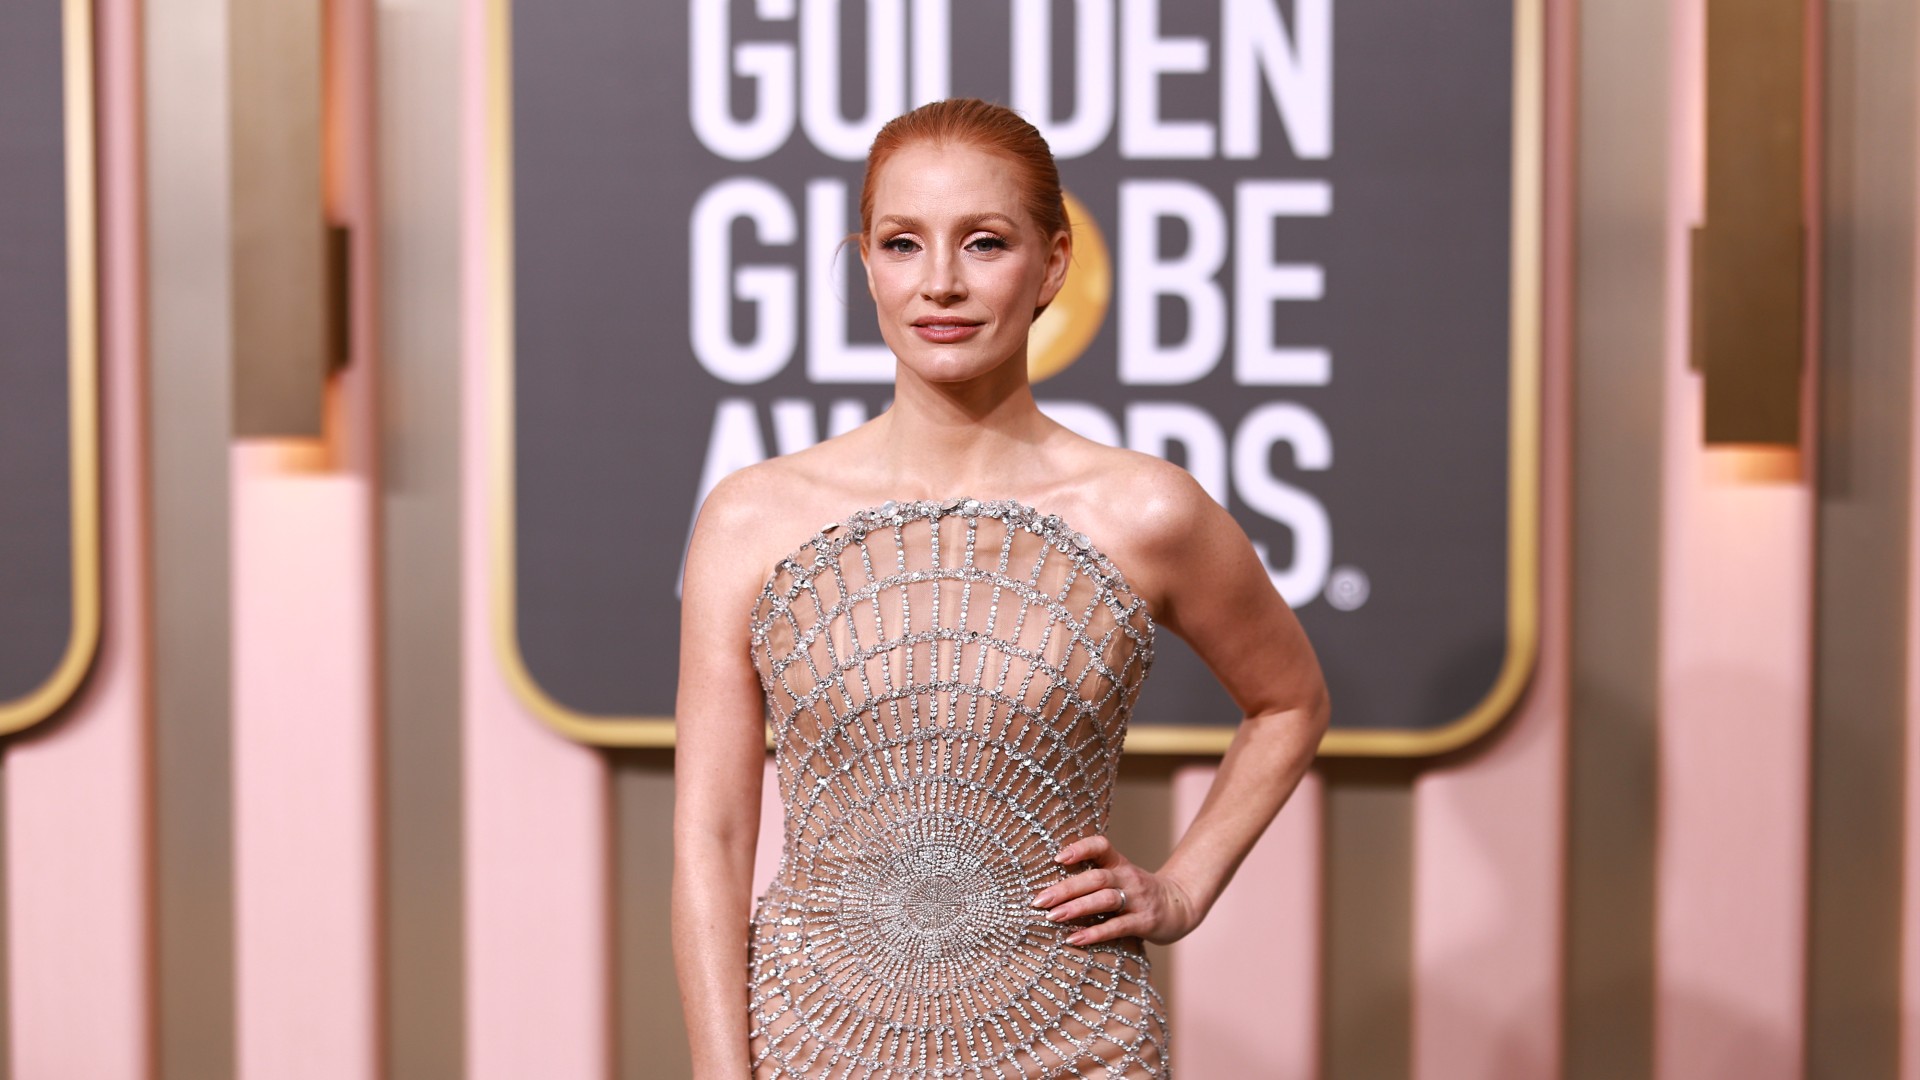 10 times Jessica Chastain stole the show in a see-through dress